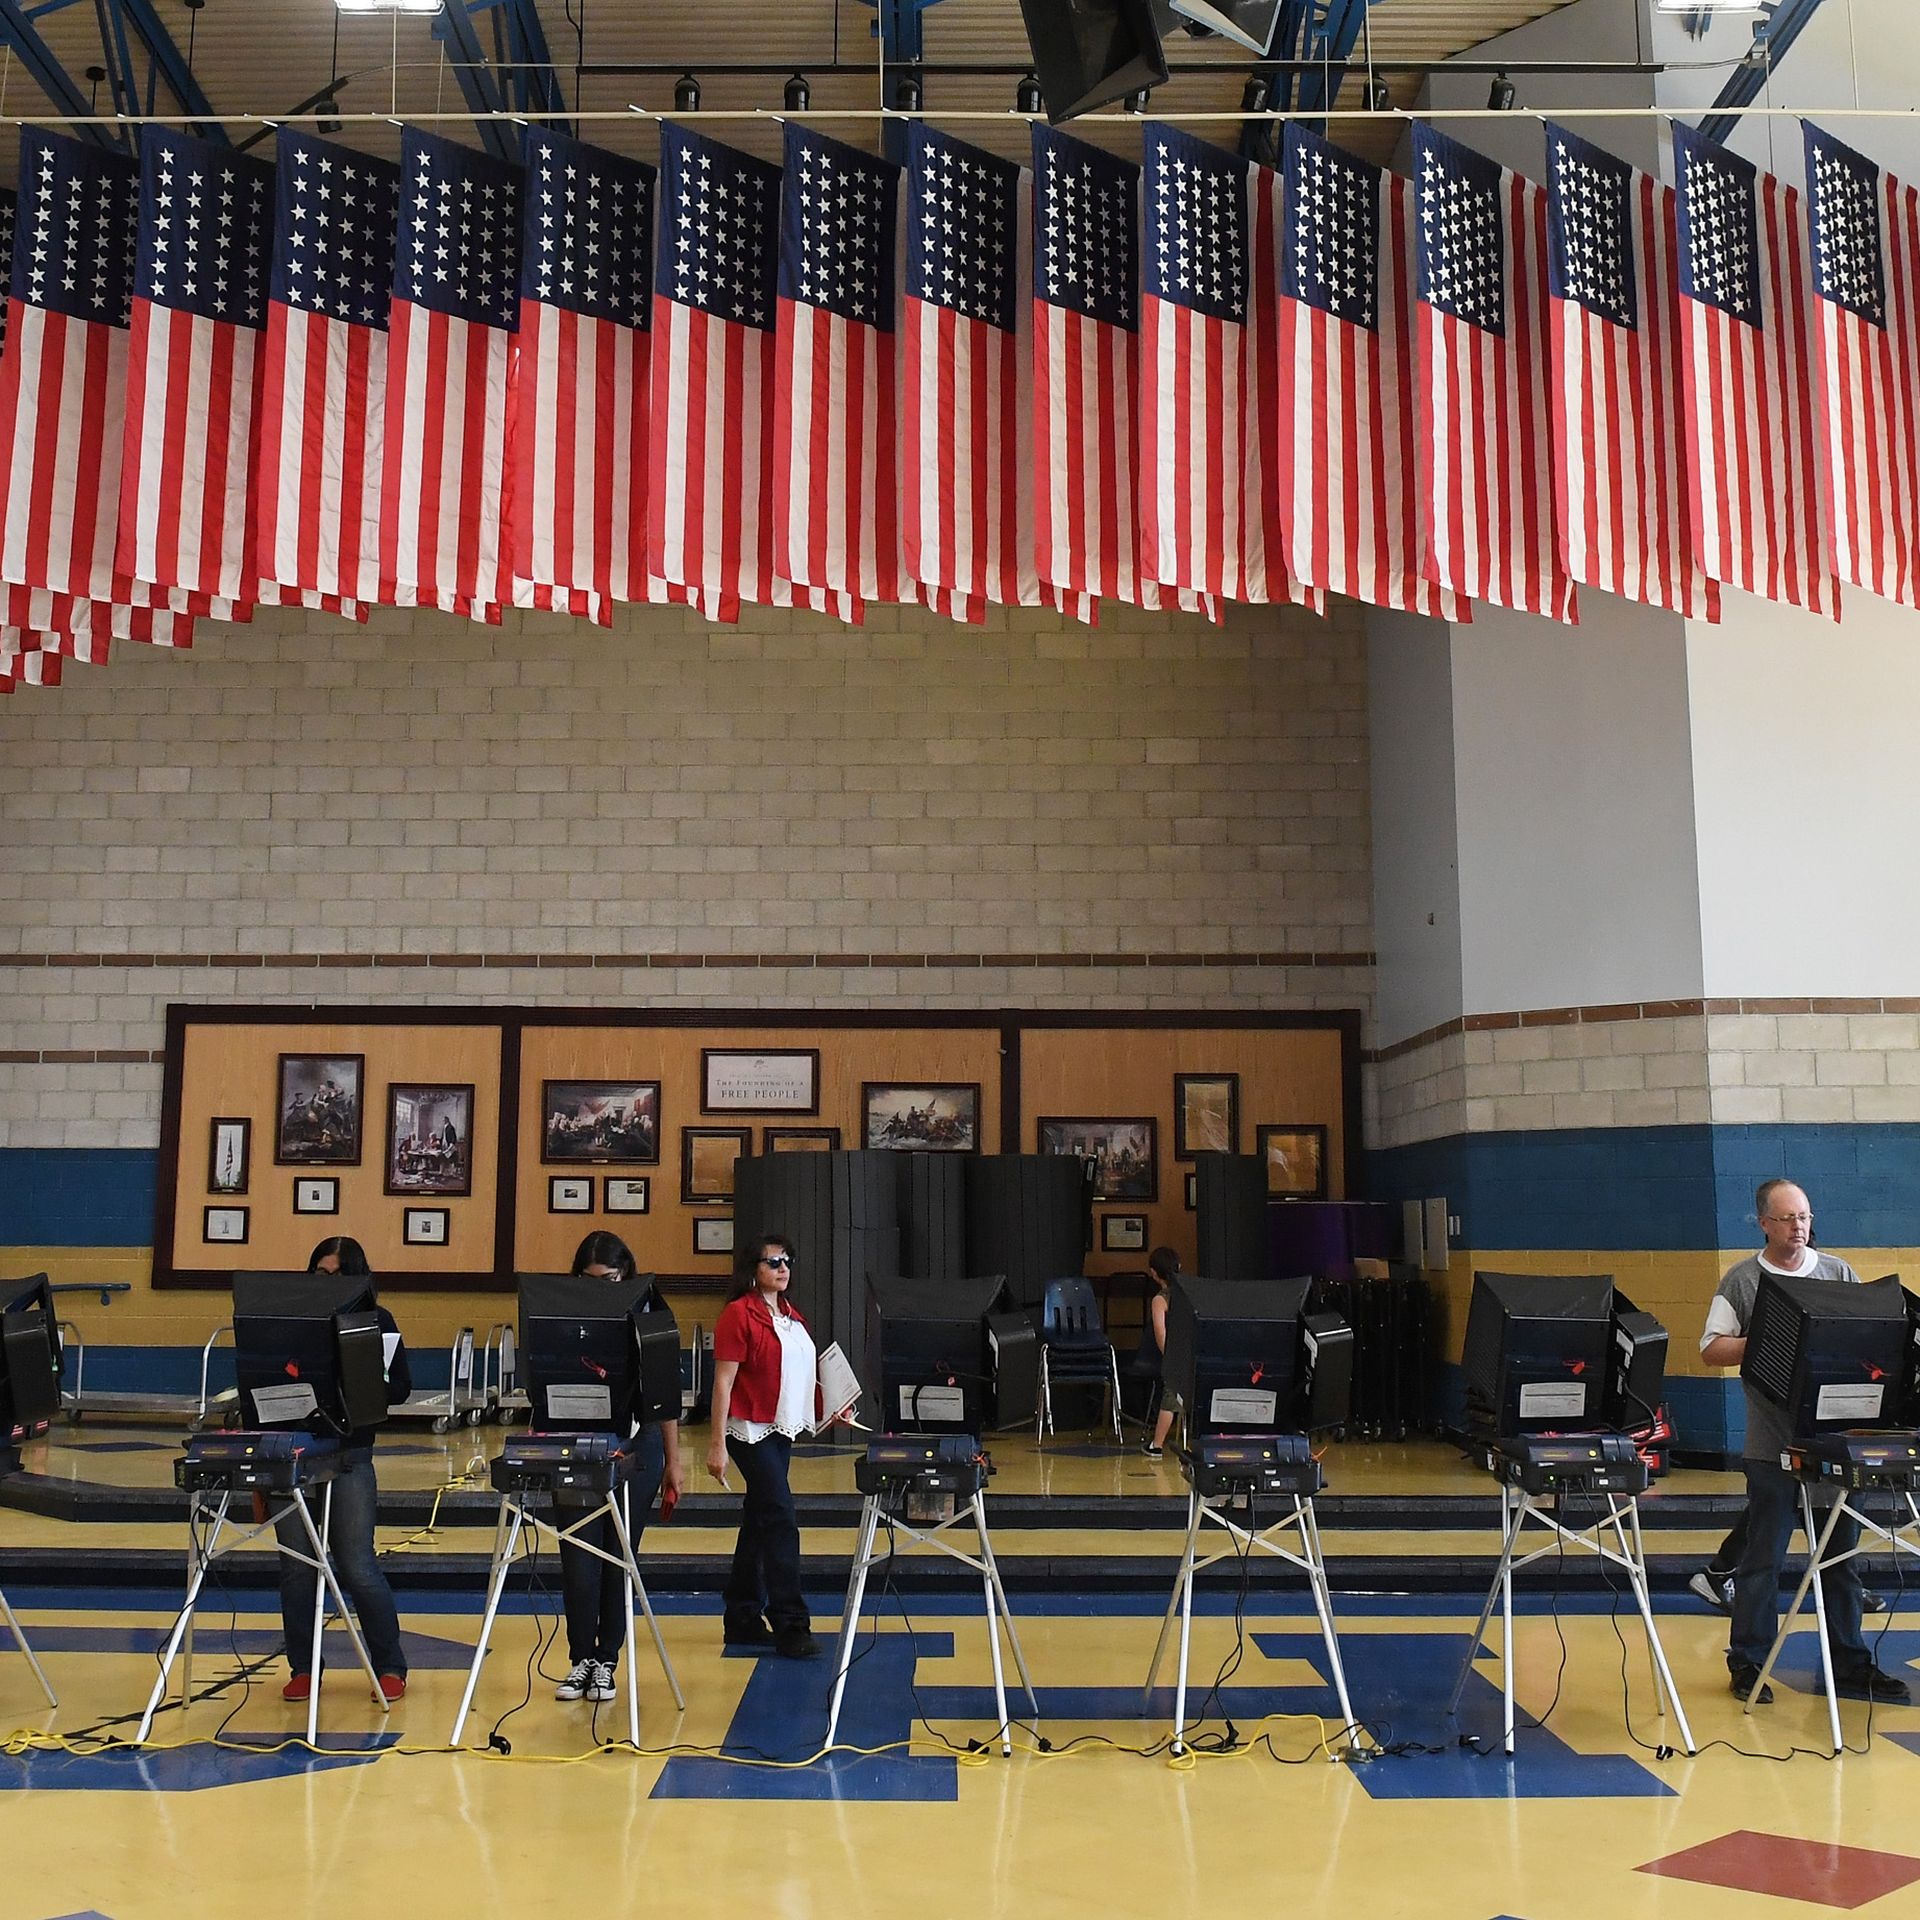 Voters cast their ballots at voting machines at Cheyenne High School on Election Day on November 8, 2016 in North Las Vegas, Nevada. 